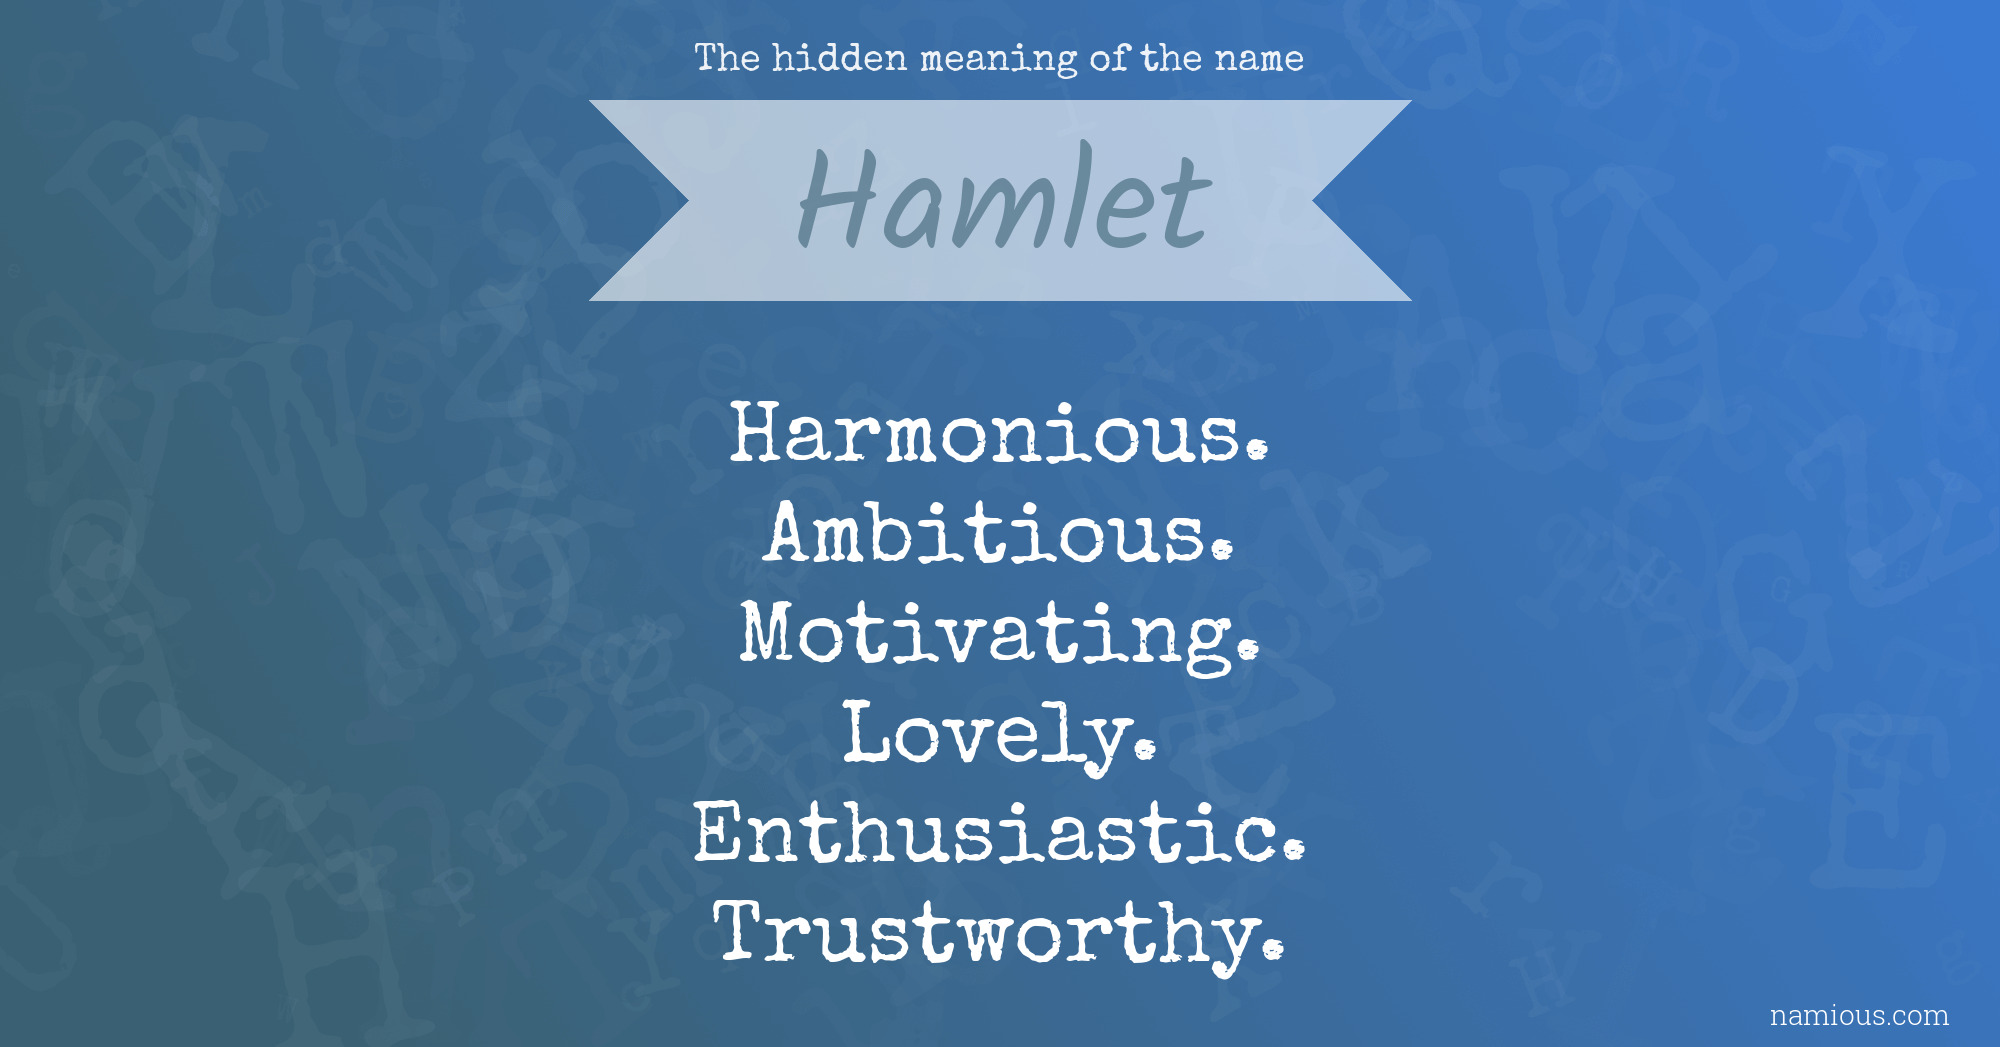 Hamlet meaning